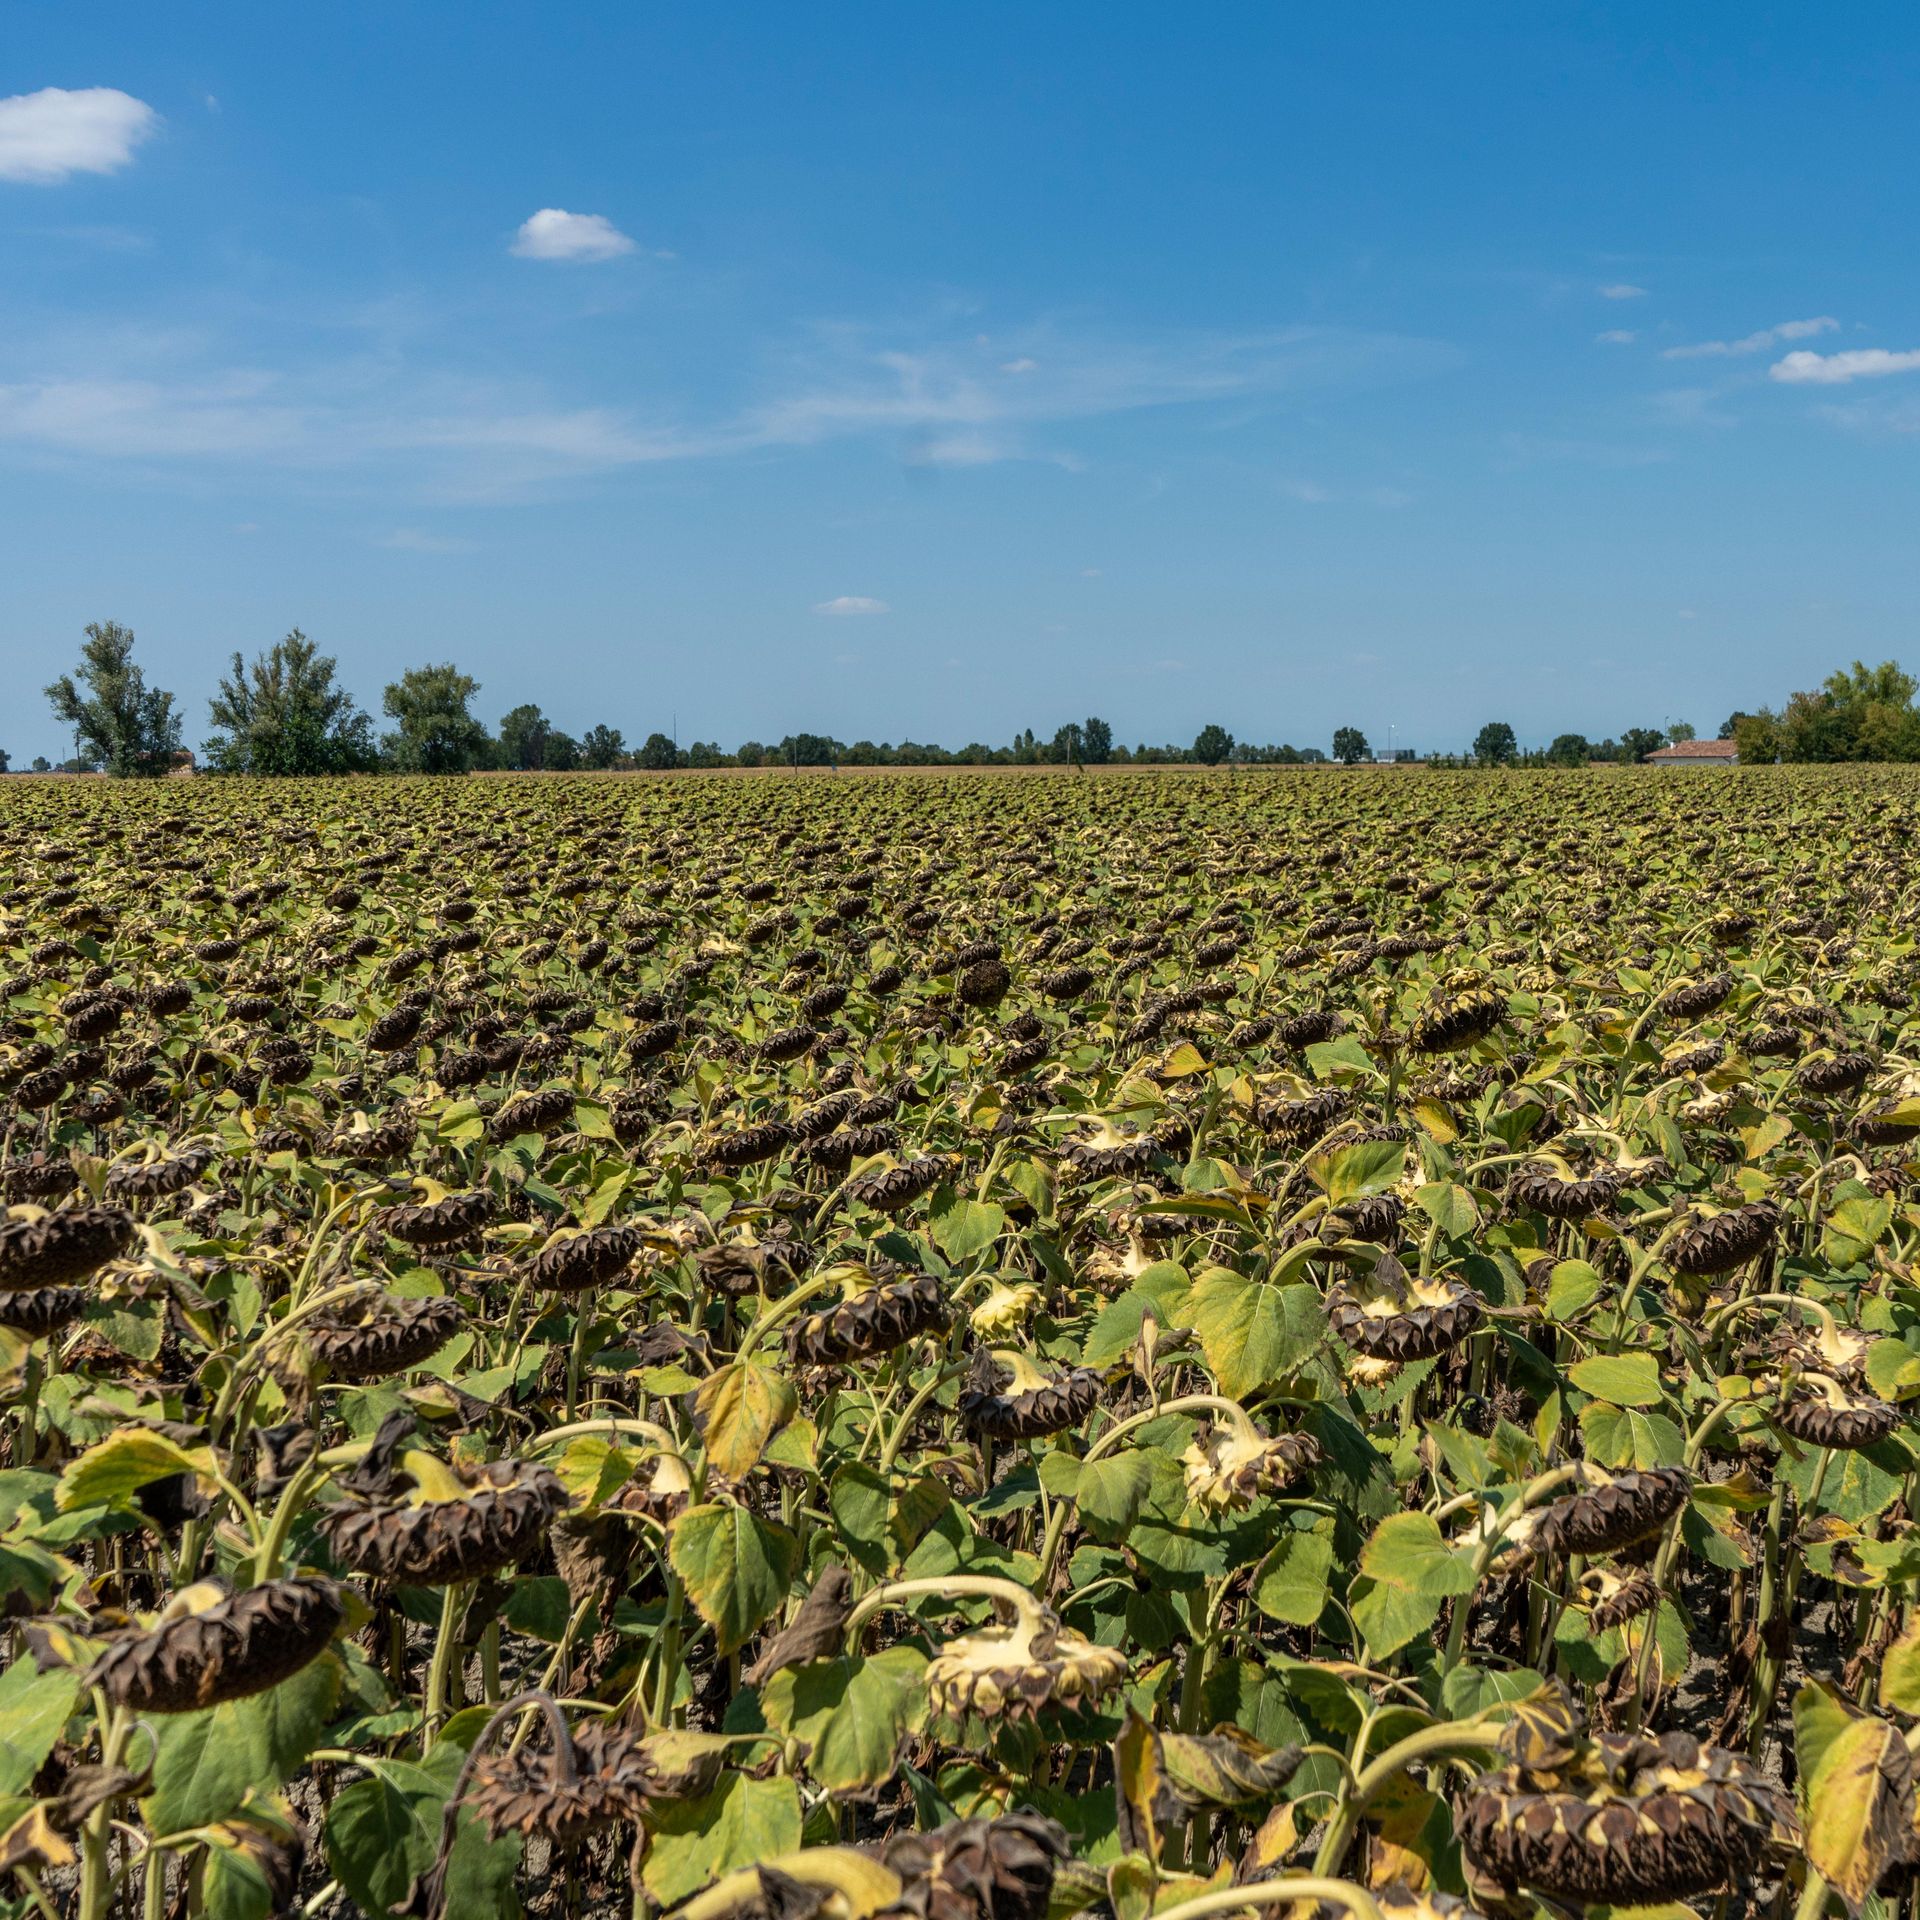 Dried sunflowers in a field near Rovigo, Italy, on August 11. Photographer: Francesca Volpi/Bloomberg via Getty Images